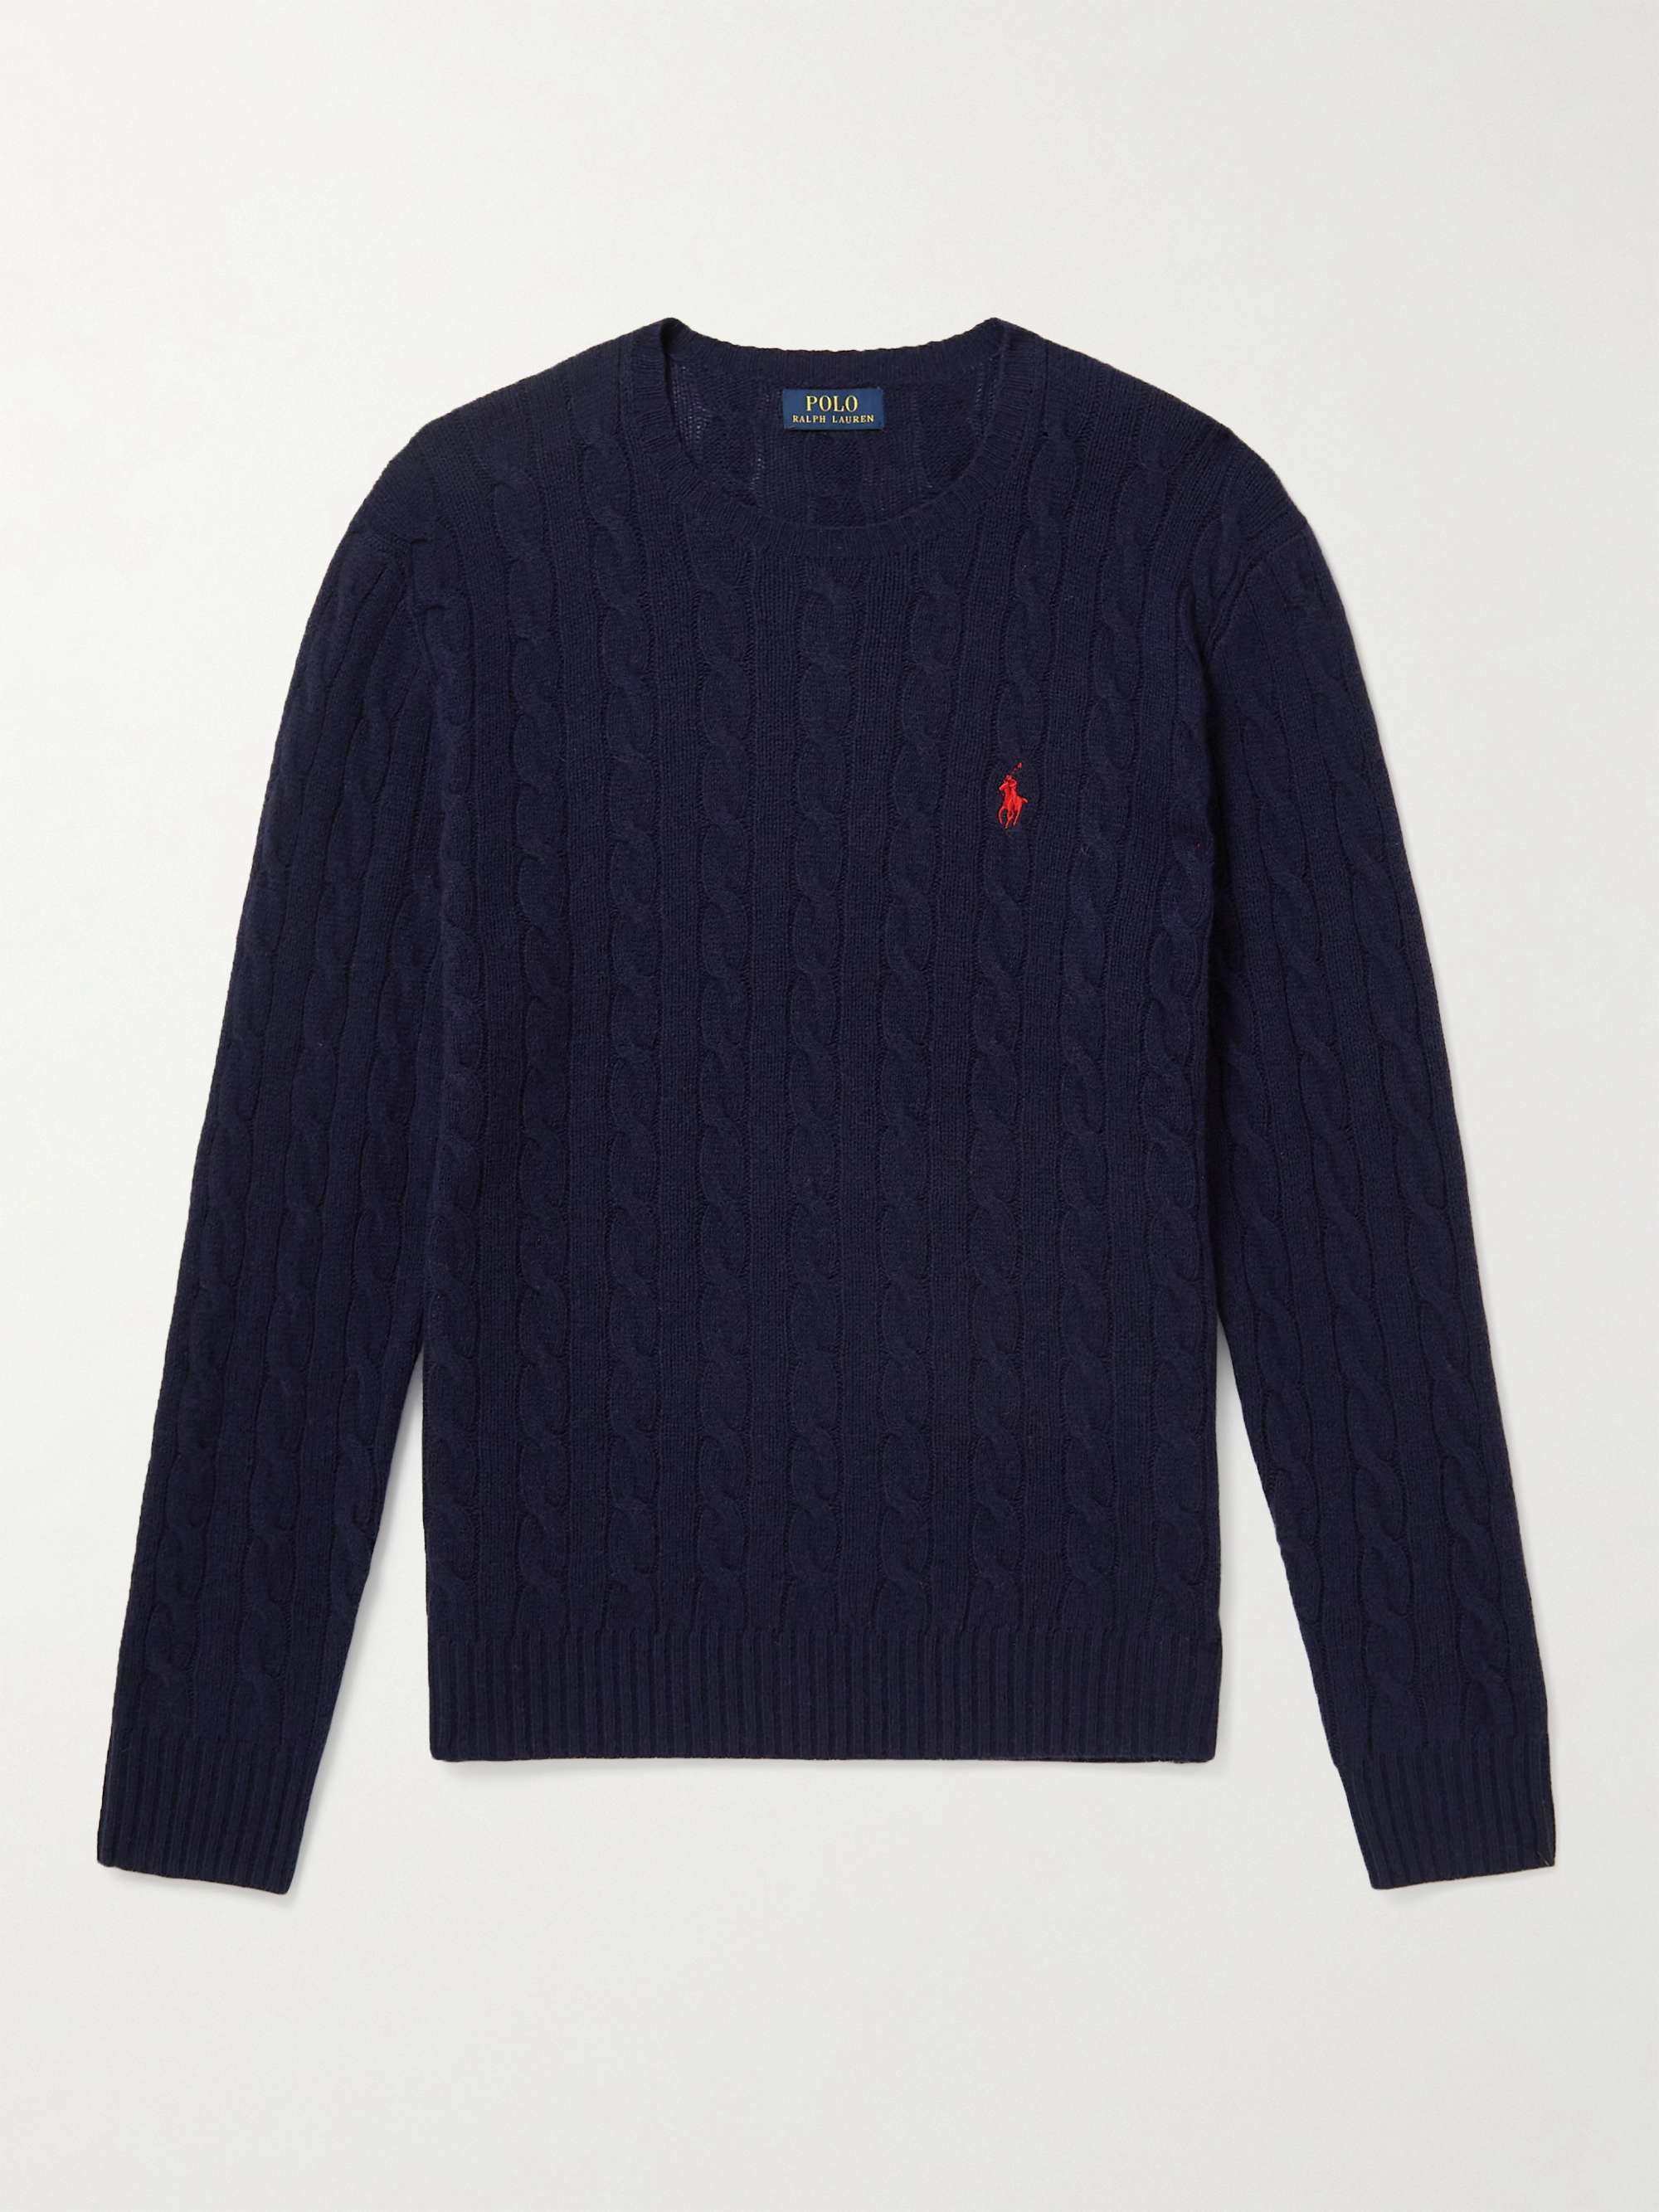 POLO RALPH LAUREN Cable-Knit Wool and Cashmere-Blend Sweater,Navy